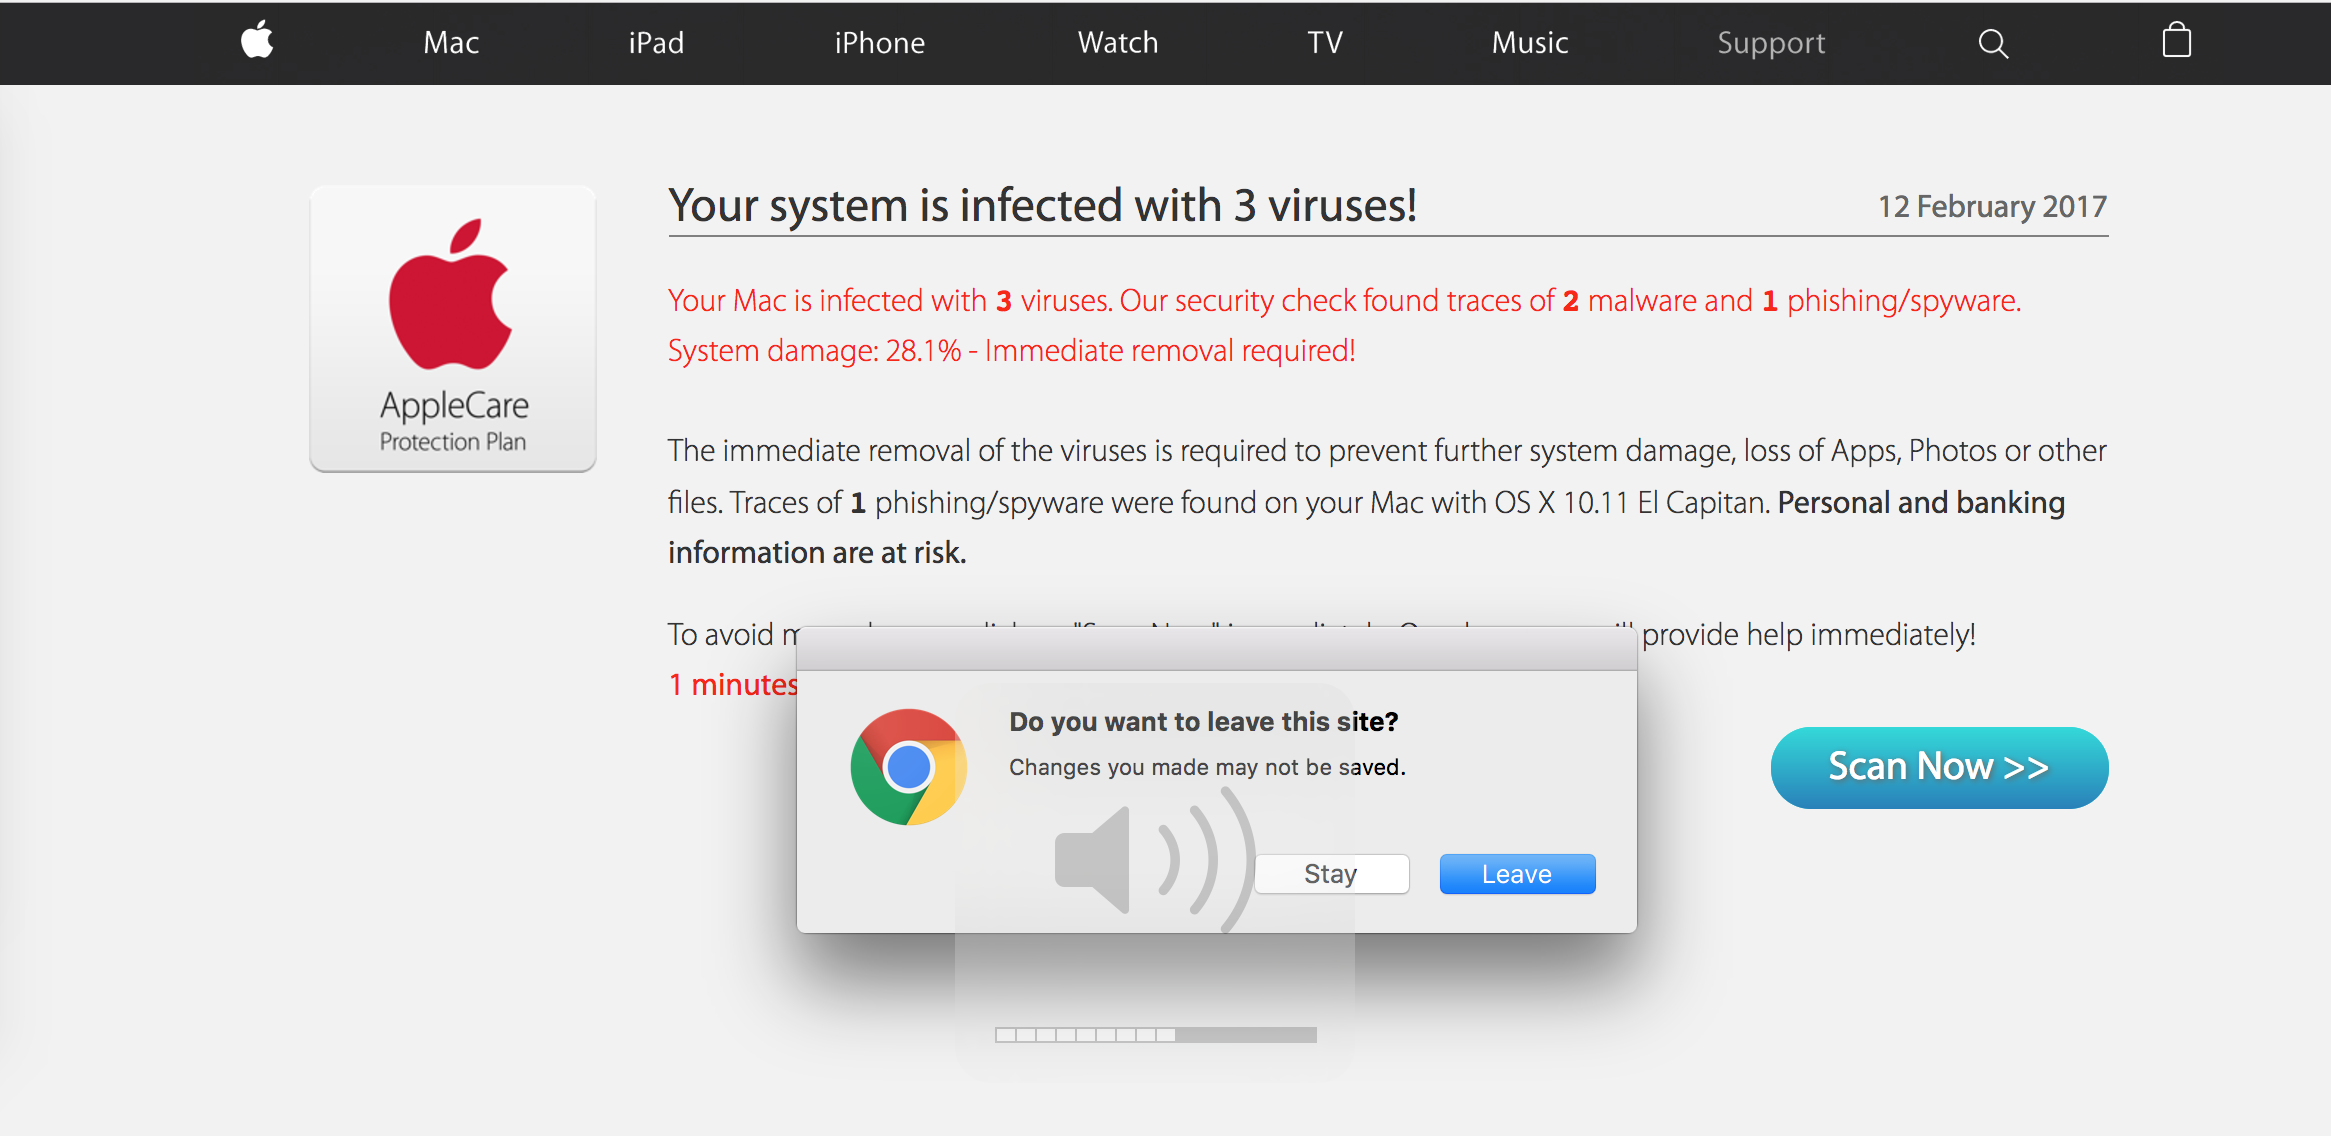 Your system is infected 3 viruses!" - Community